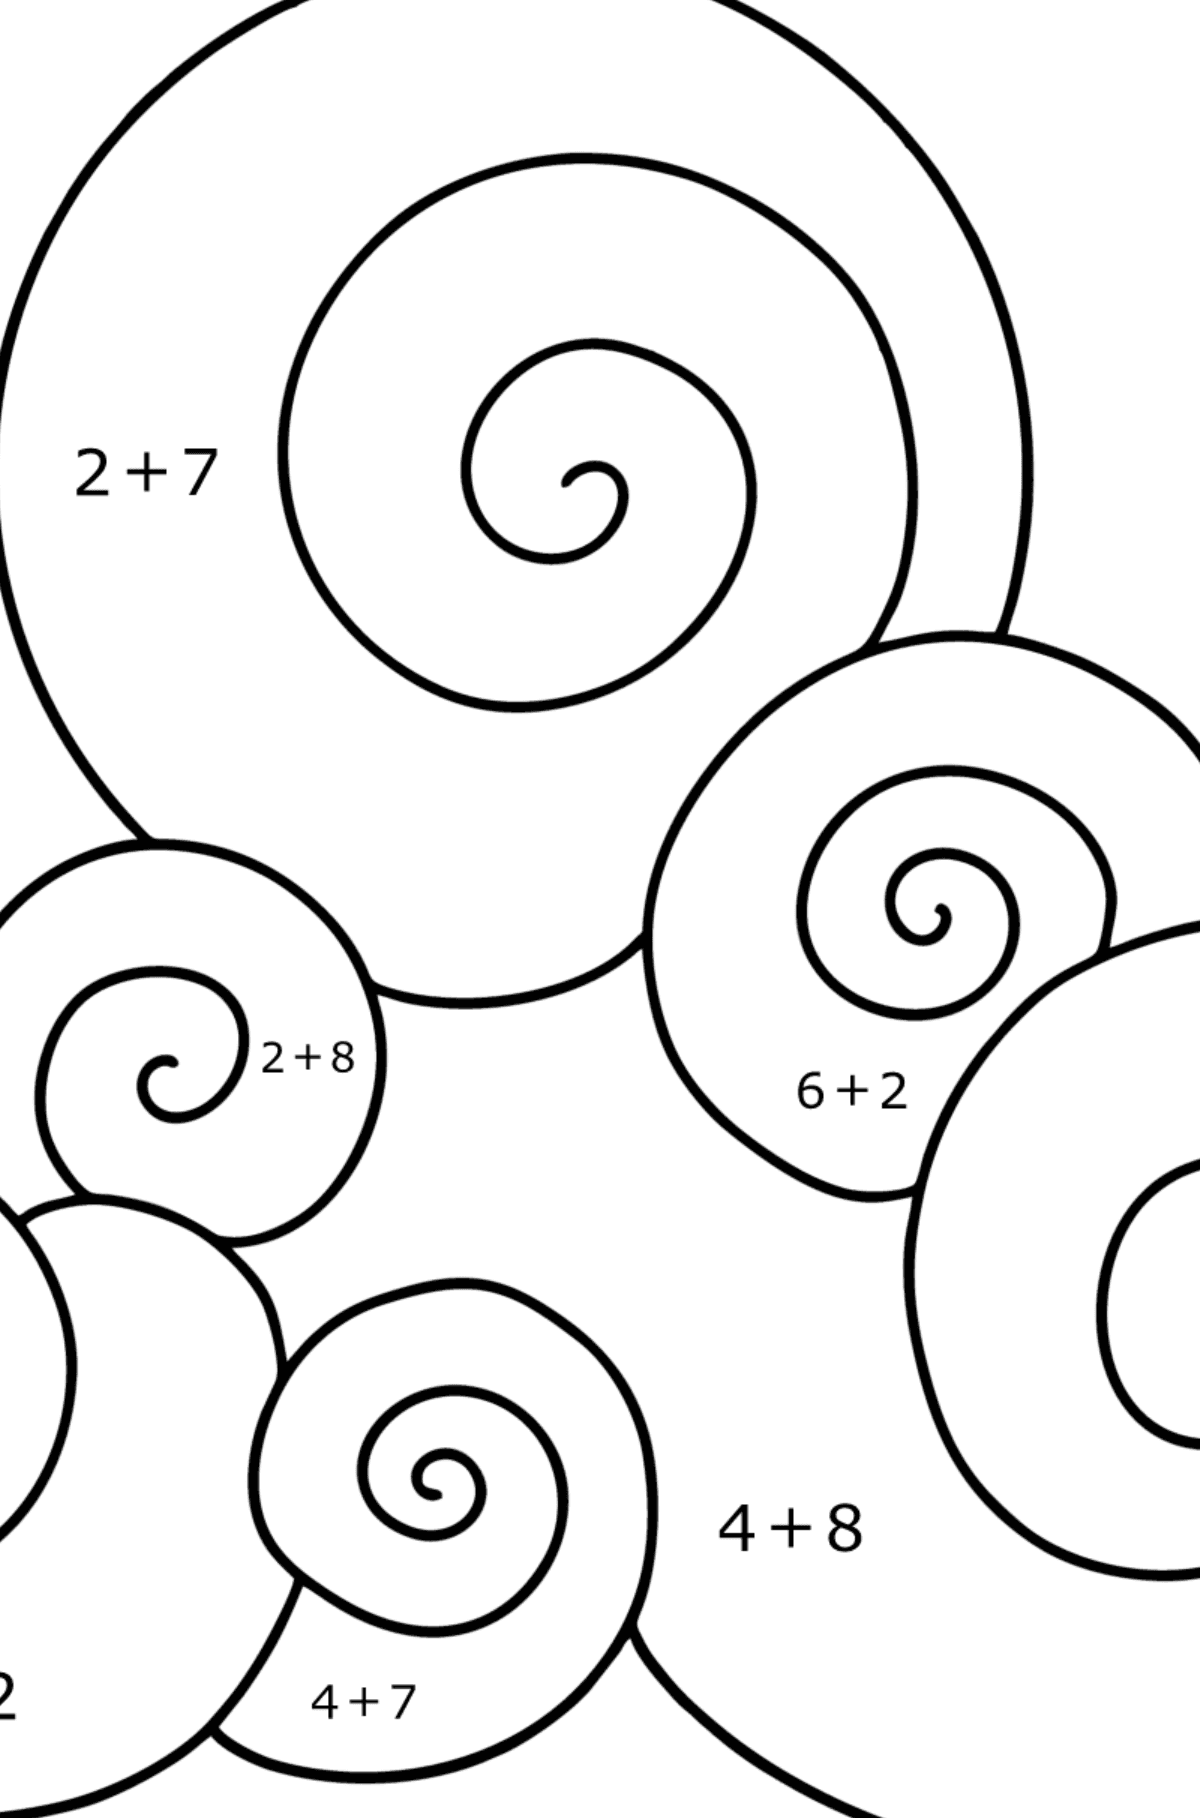 Simple Zen clouds coloring page - Math Coloring - Addition for Kids